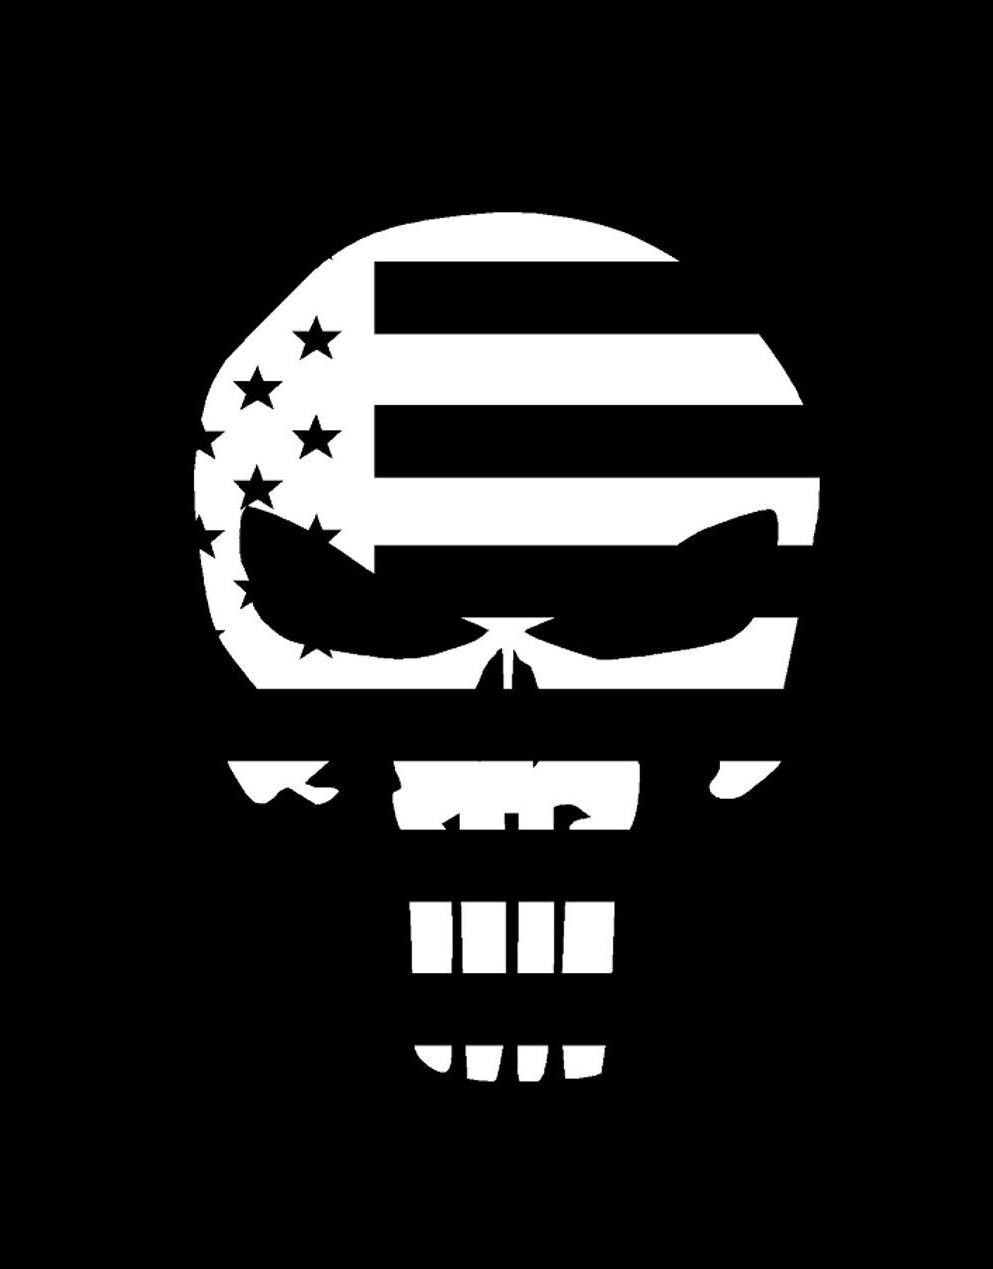 Jeep With Skull Wallpaper Kyle Punisher Skull American